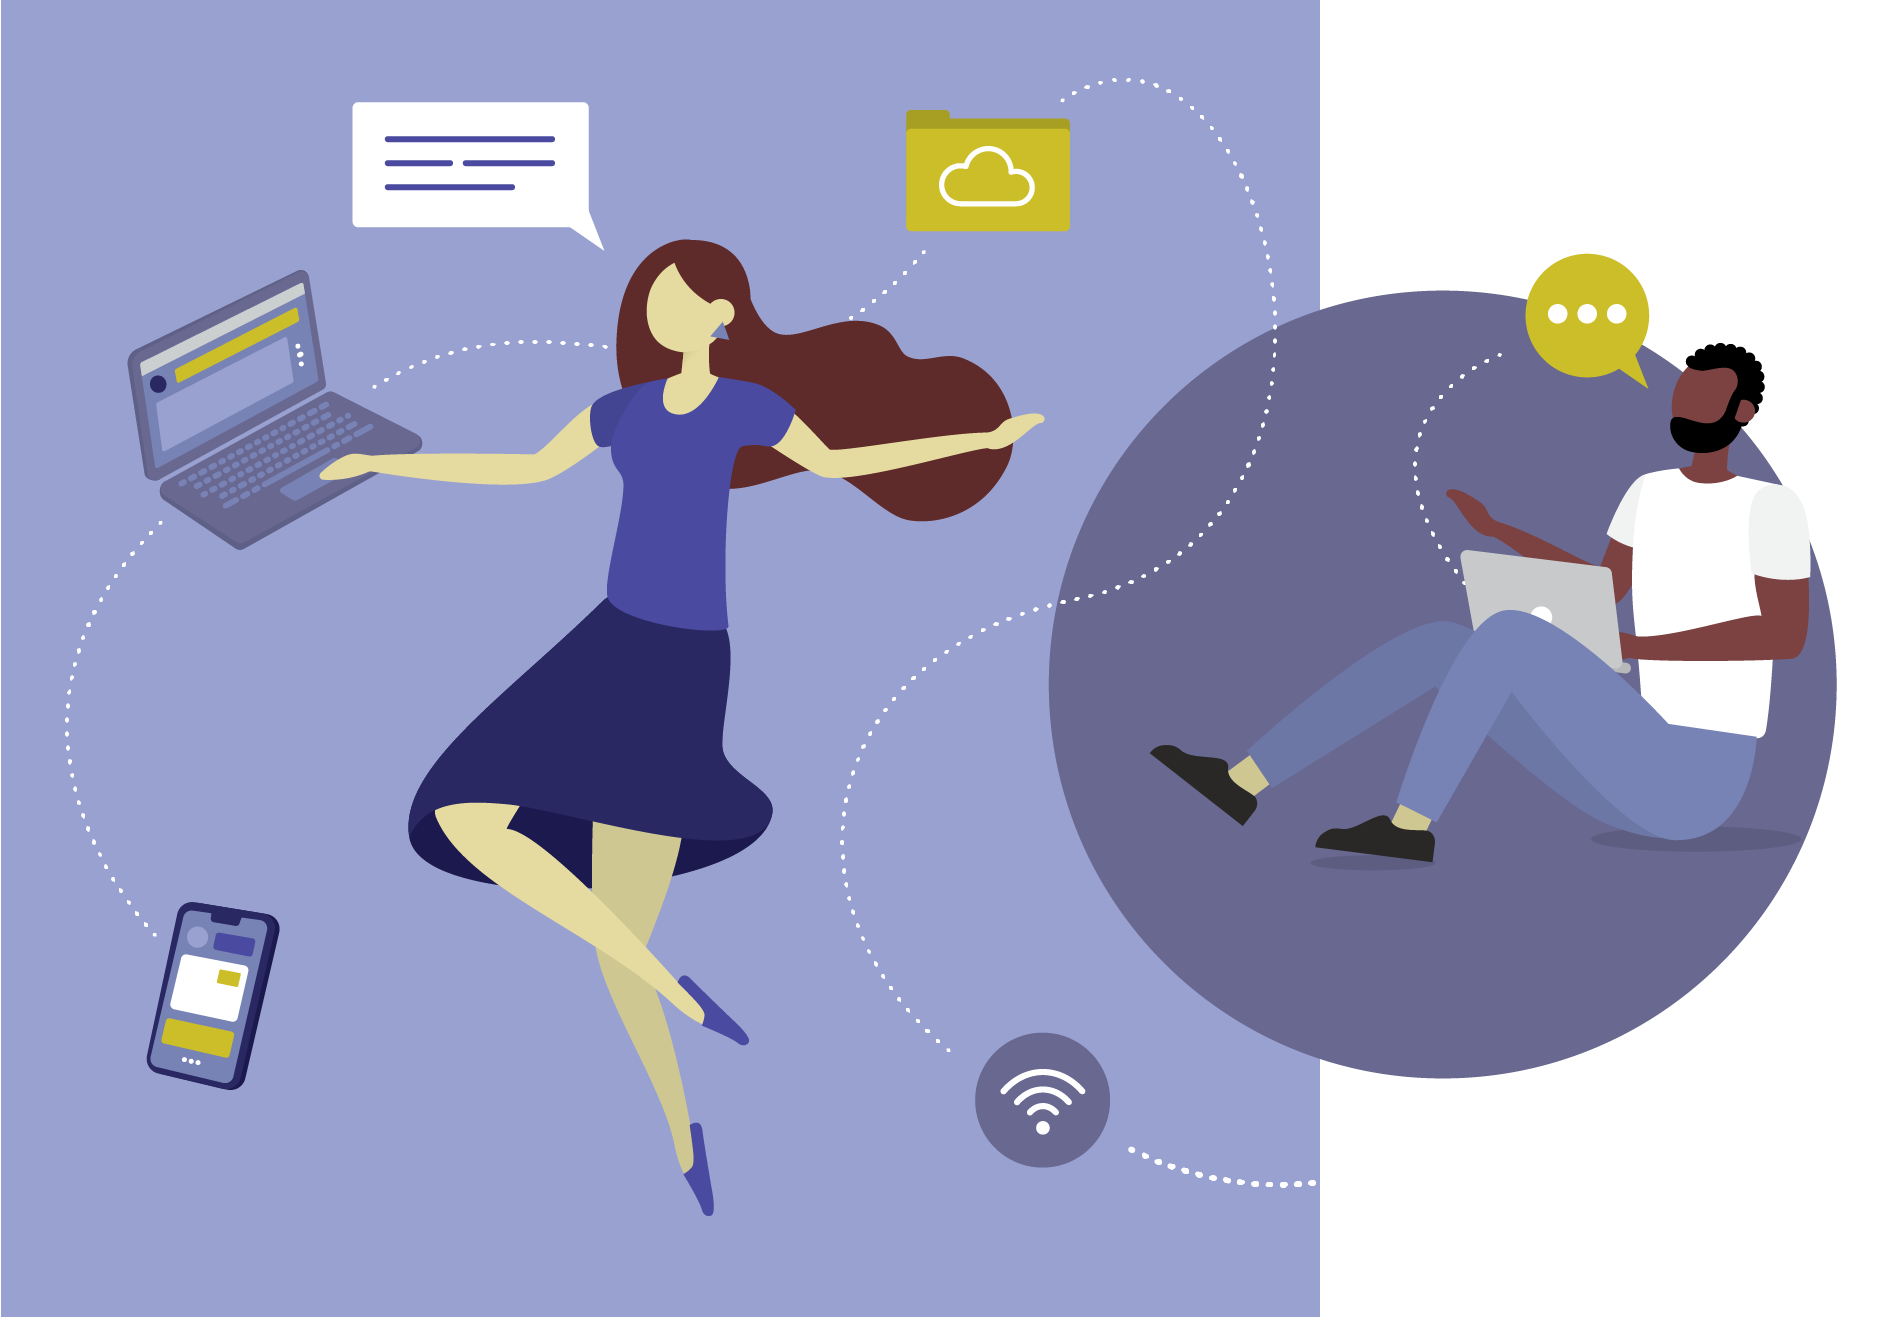 An illustration depicting two users communicating via a range of business technology and communications services.